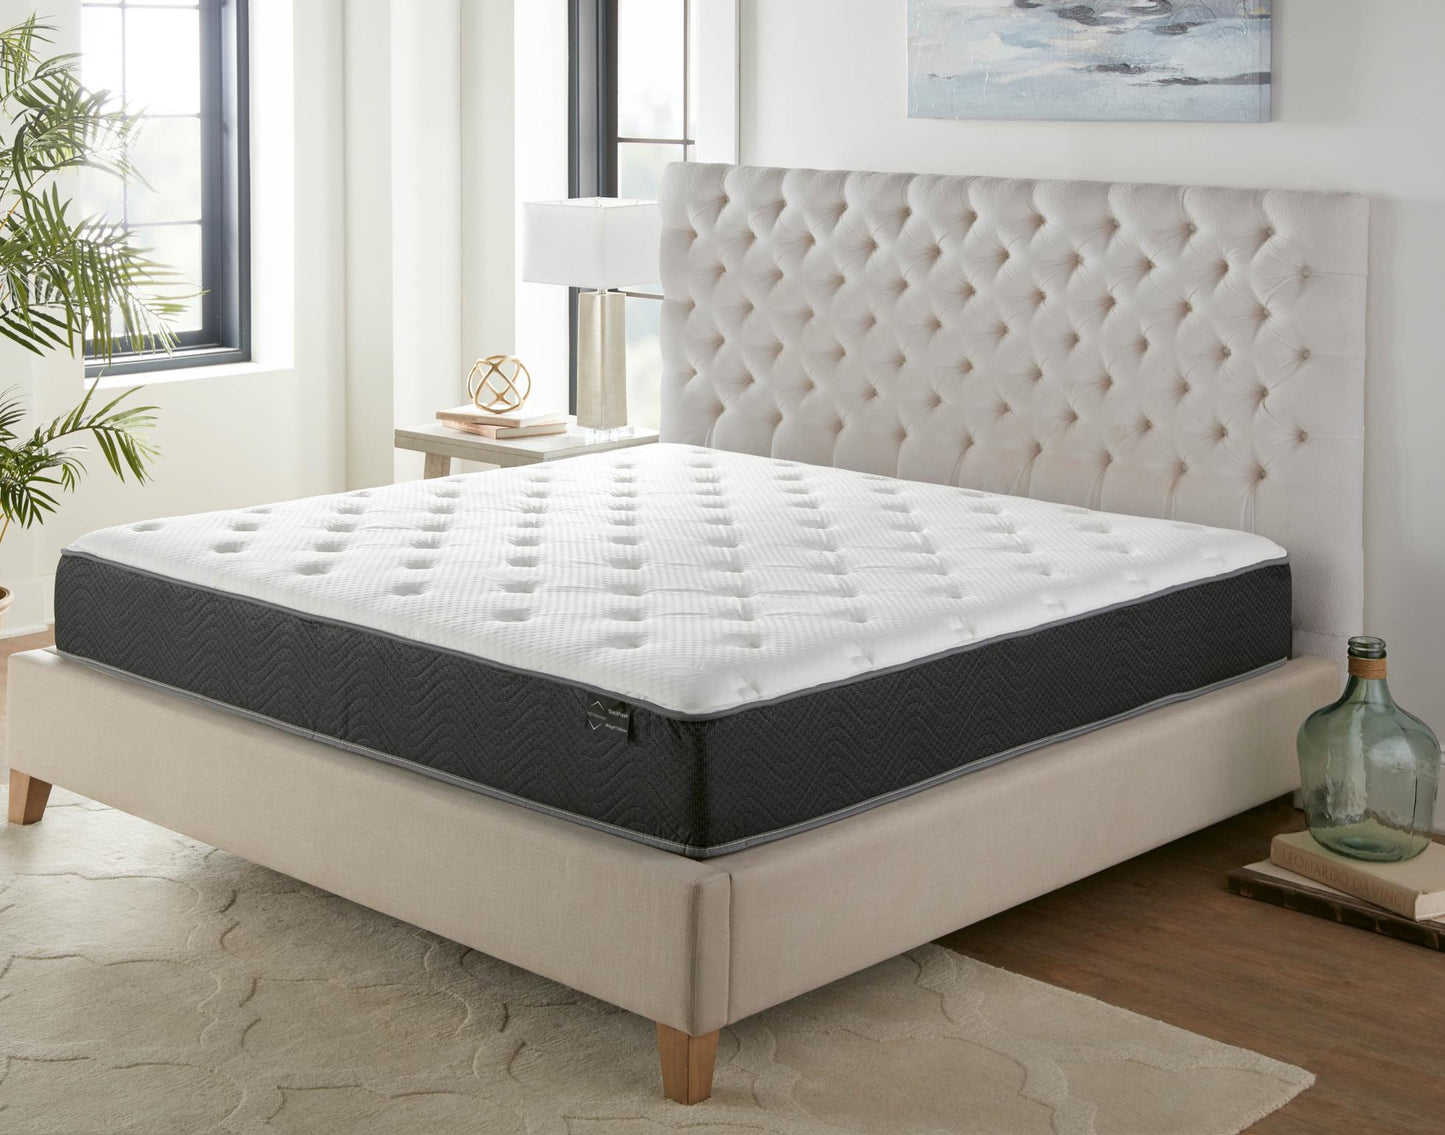 WEEKLY or MONTHLY. Silver Bamboo King Mattress